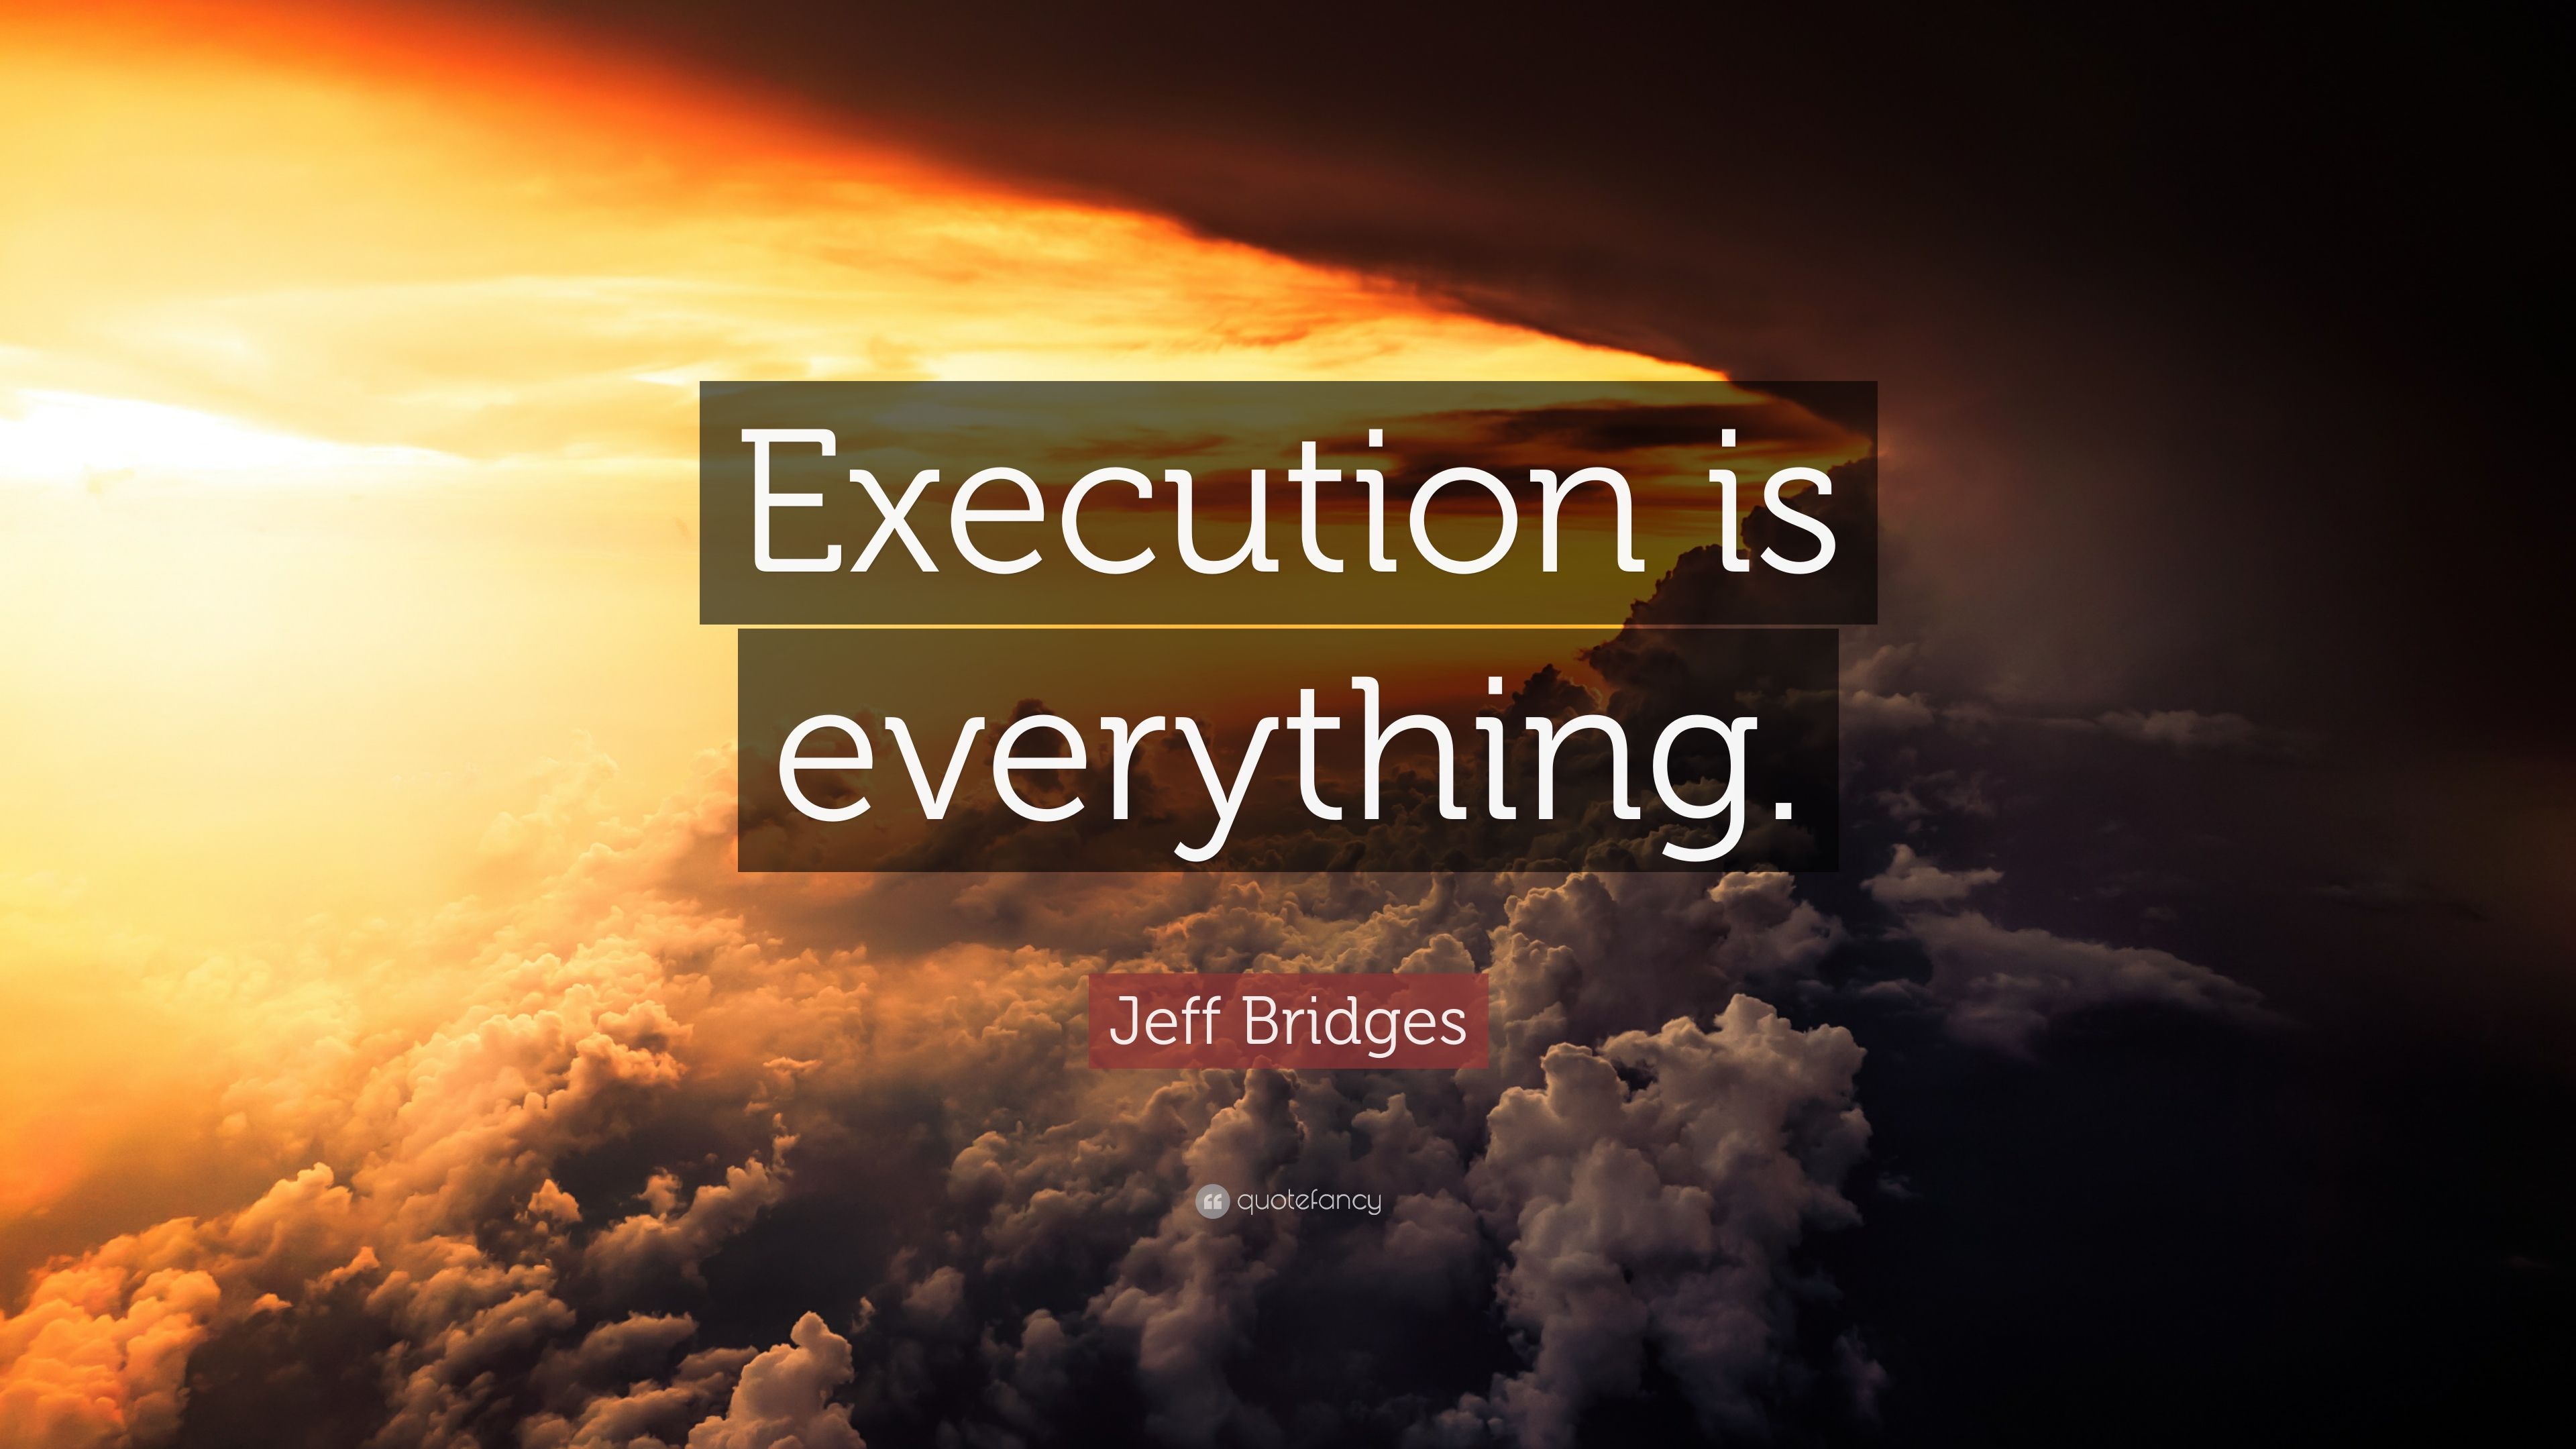 Jeff Bridges Quote: “Execution is everything.” (12 wallpaper)